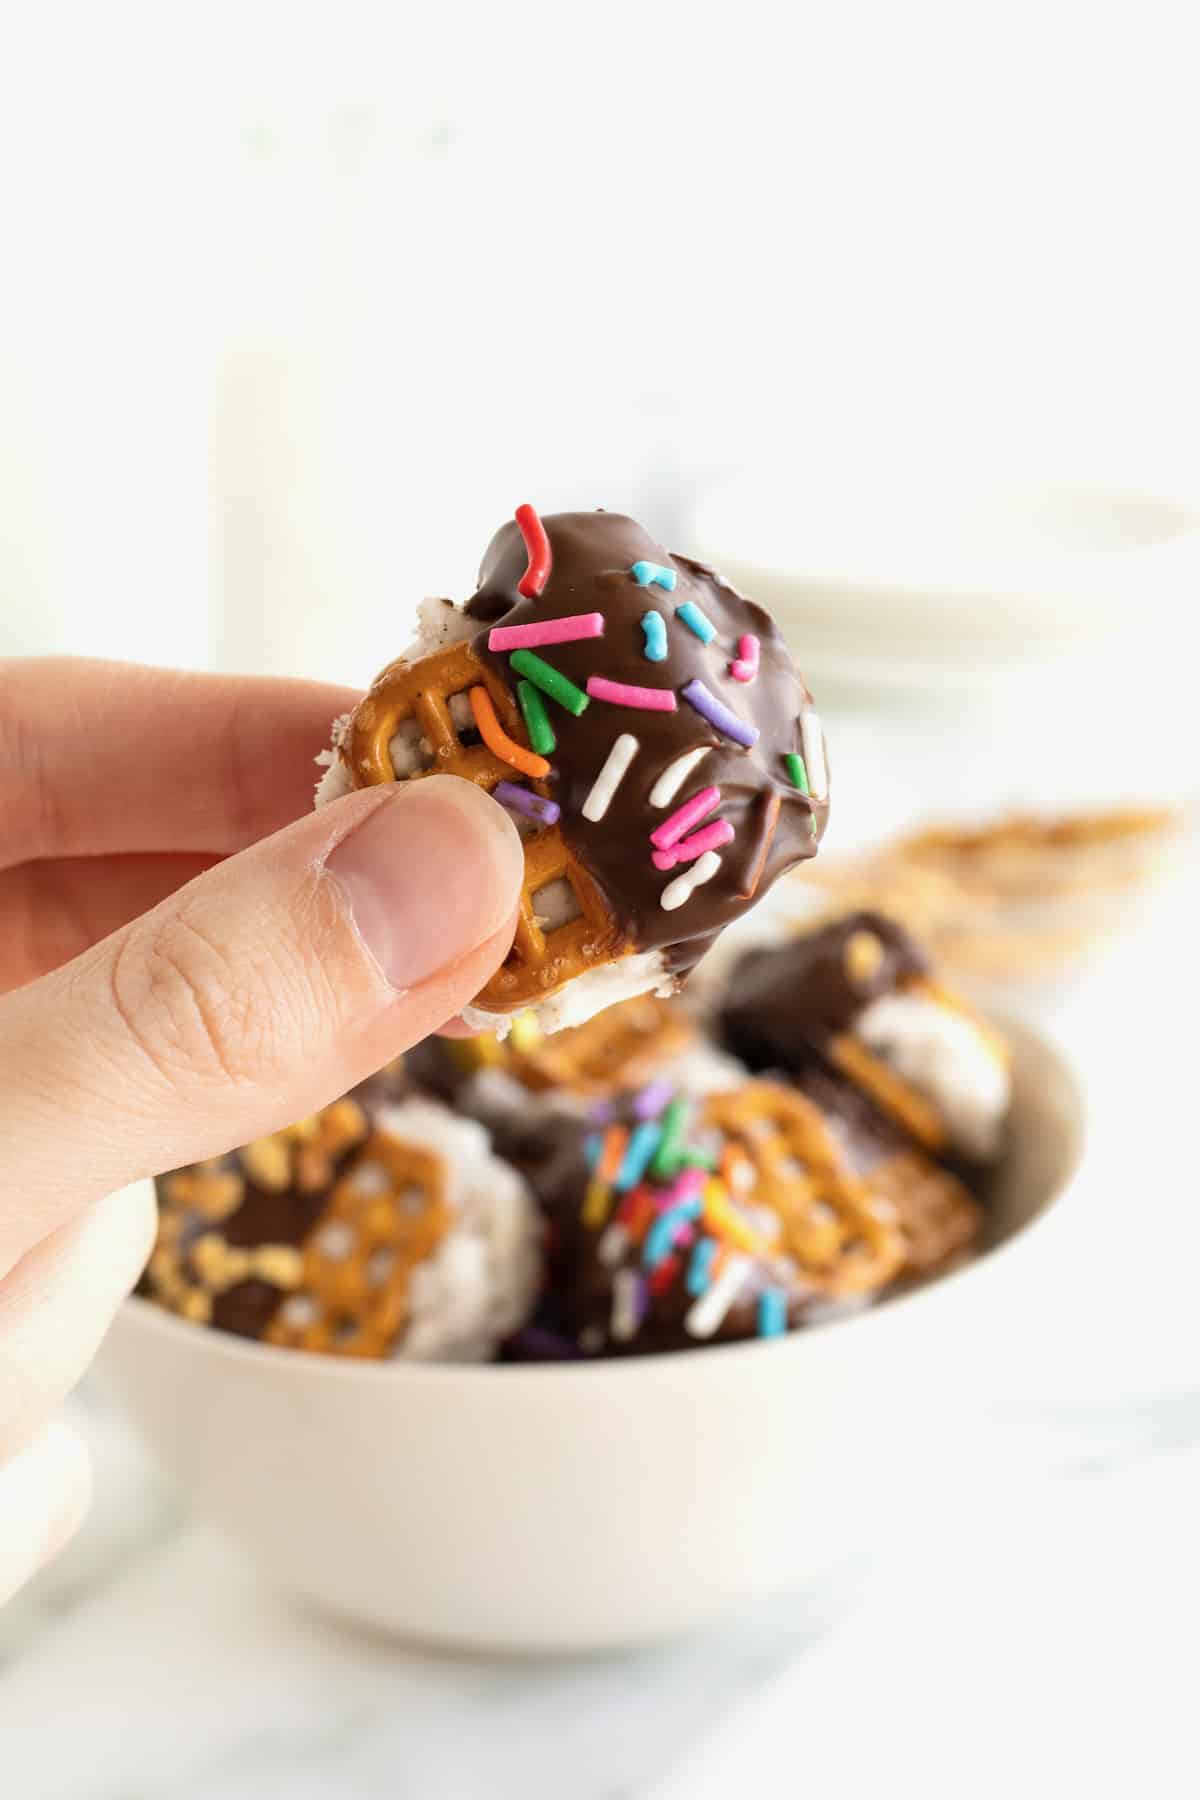 A mini ice cream sandwich made with pretzels and dipped in chocolate and coated in rainbow sprinkles.